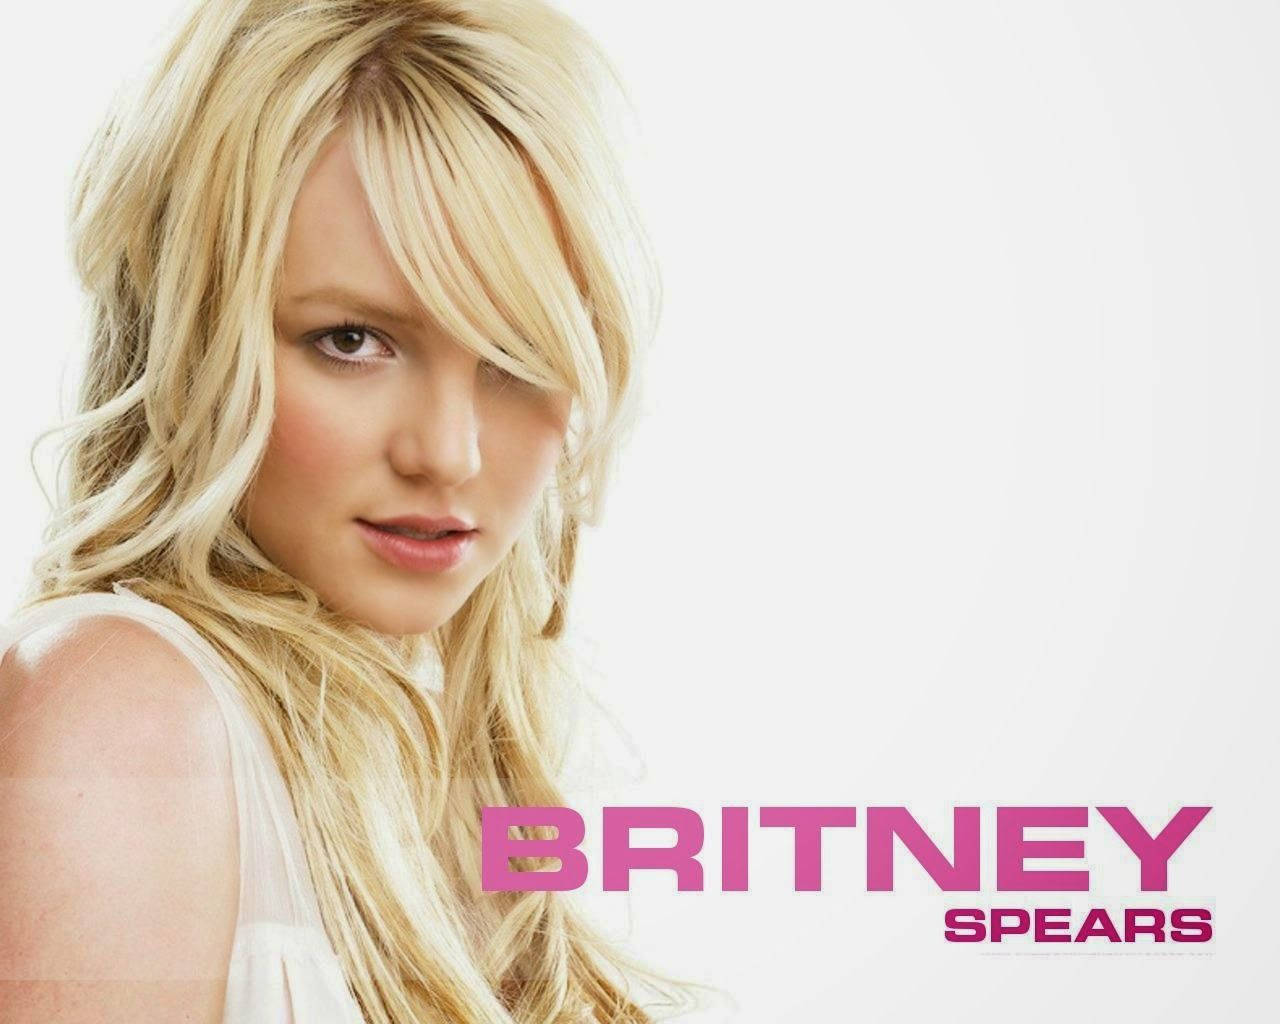 Britney Spears Having Fun In Pink And White Background